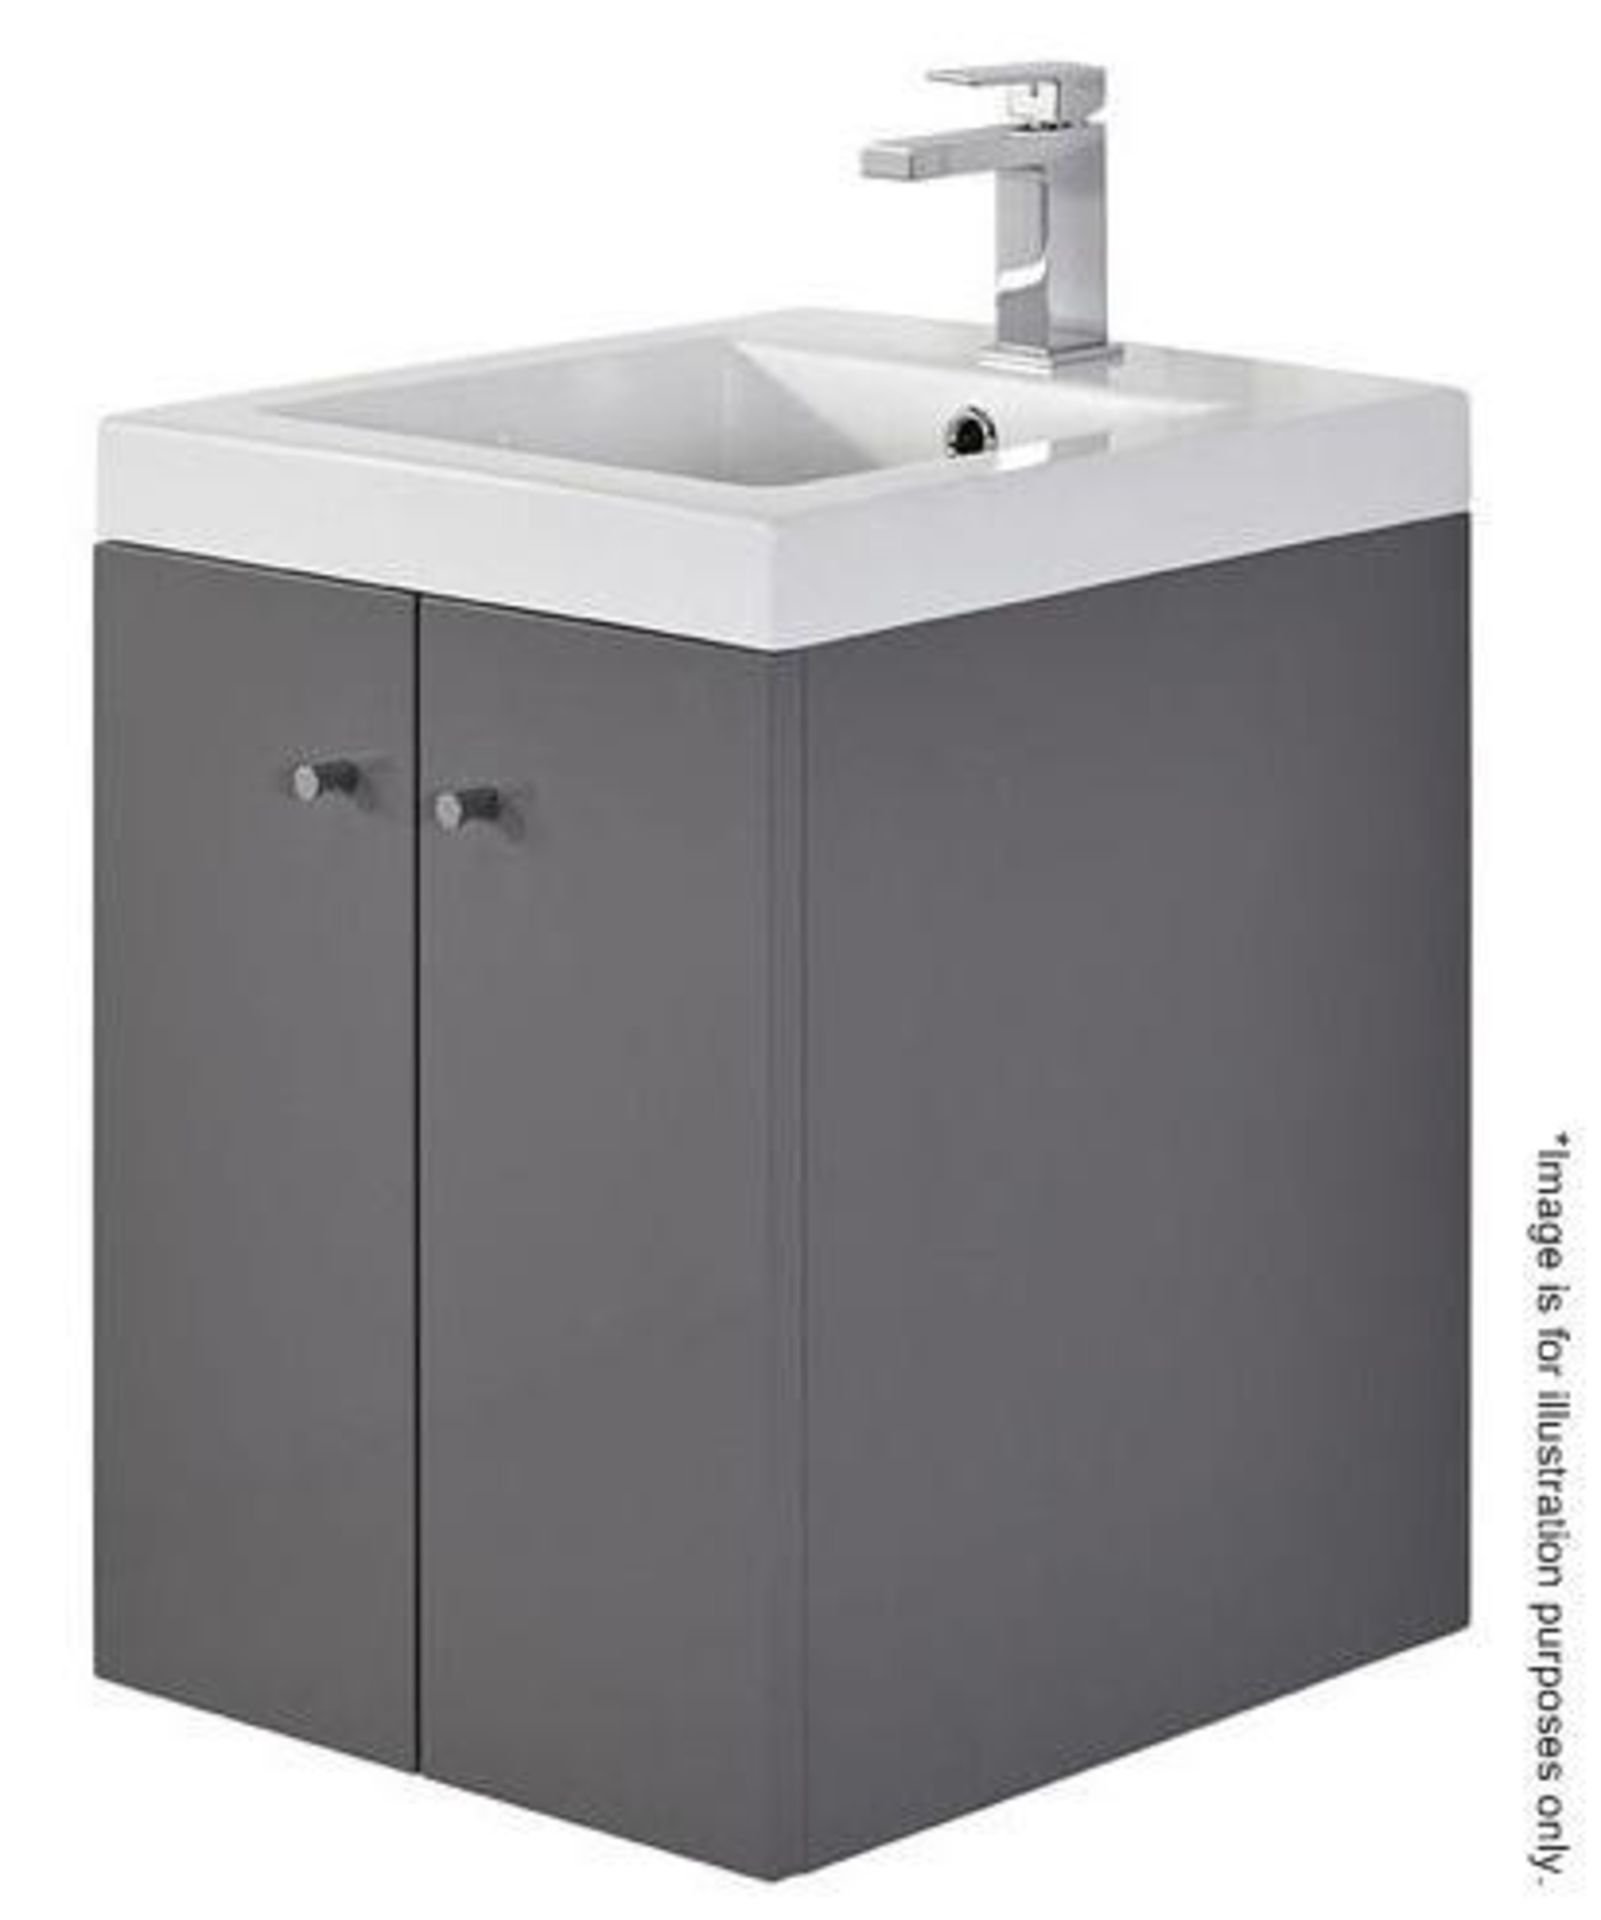 10 x Alpine Duo 400 Wall Hung Vanity Units In Gloss Grey - Brand New Boxed Stock - Dimensions: H49 x